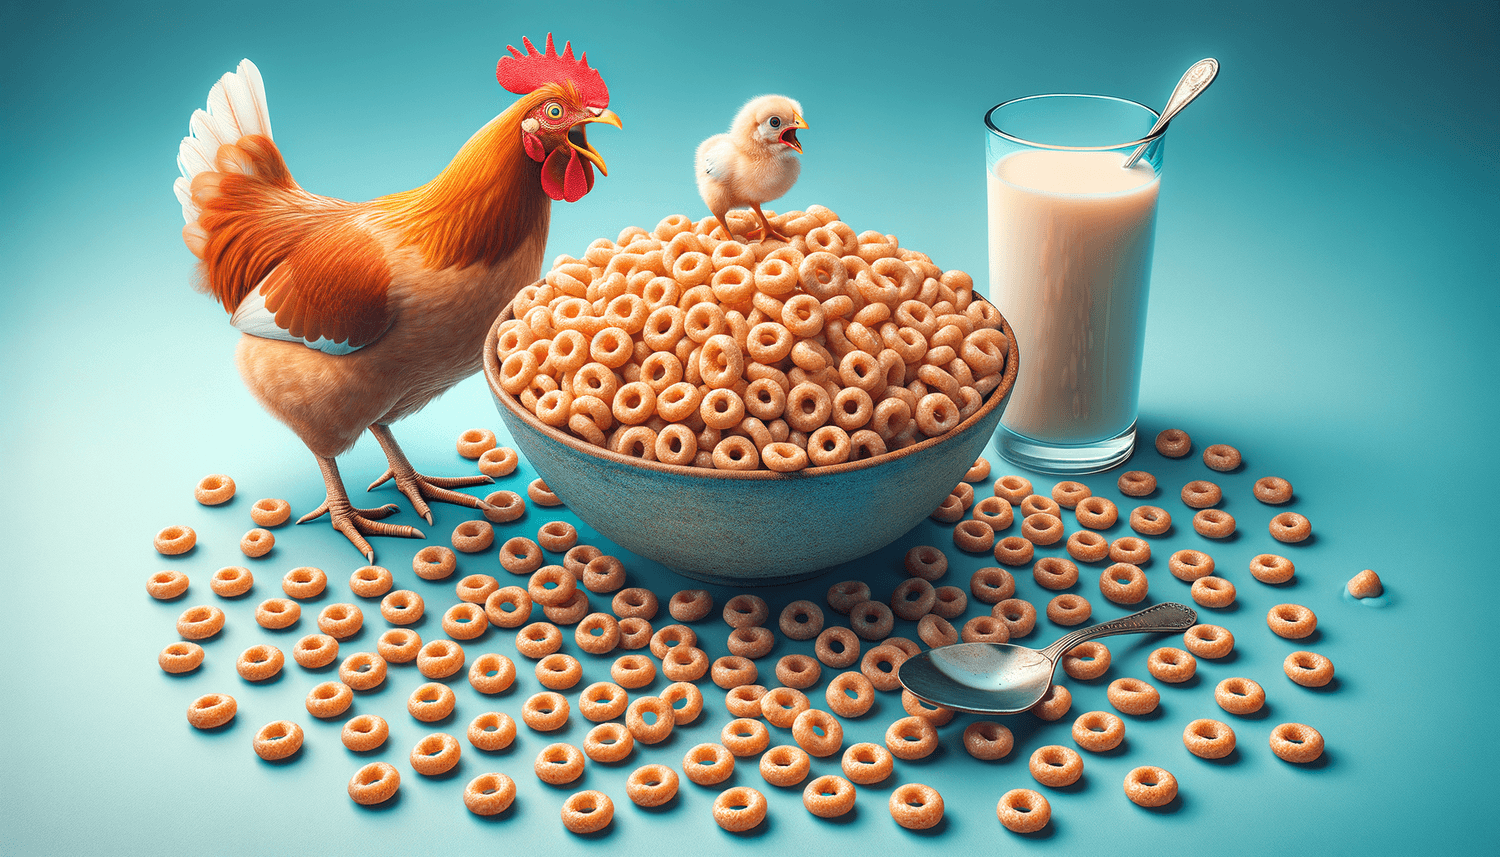 Can Chickens Eat Cheerios Cereal?